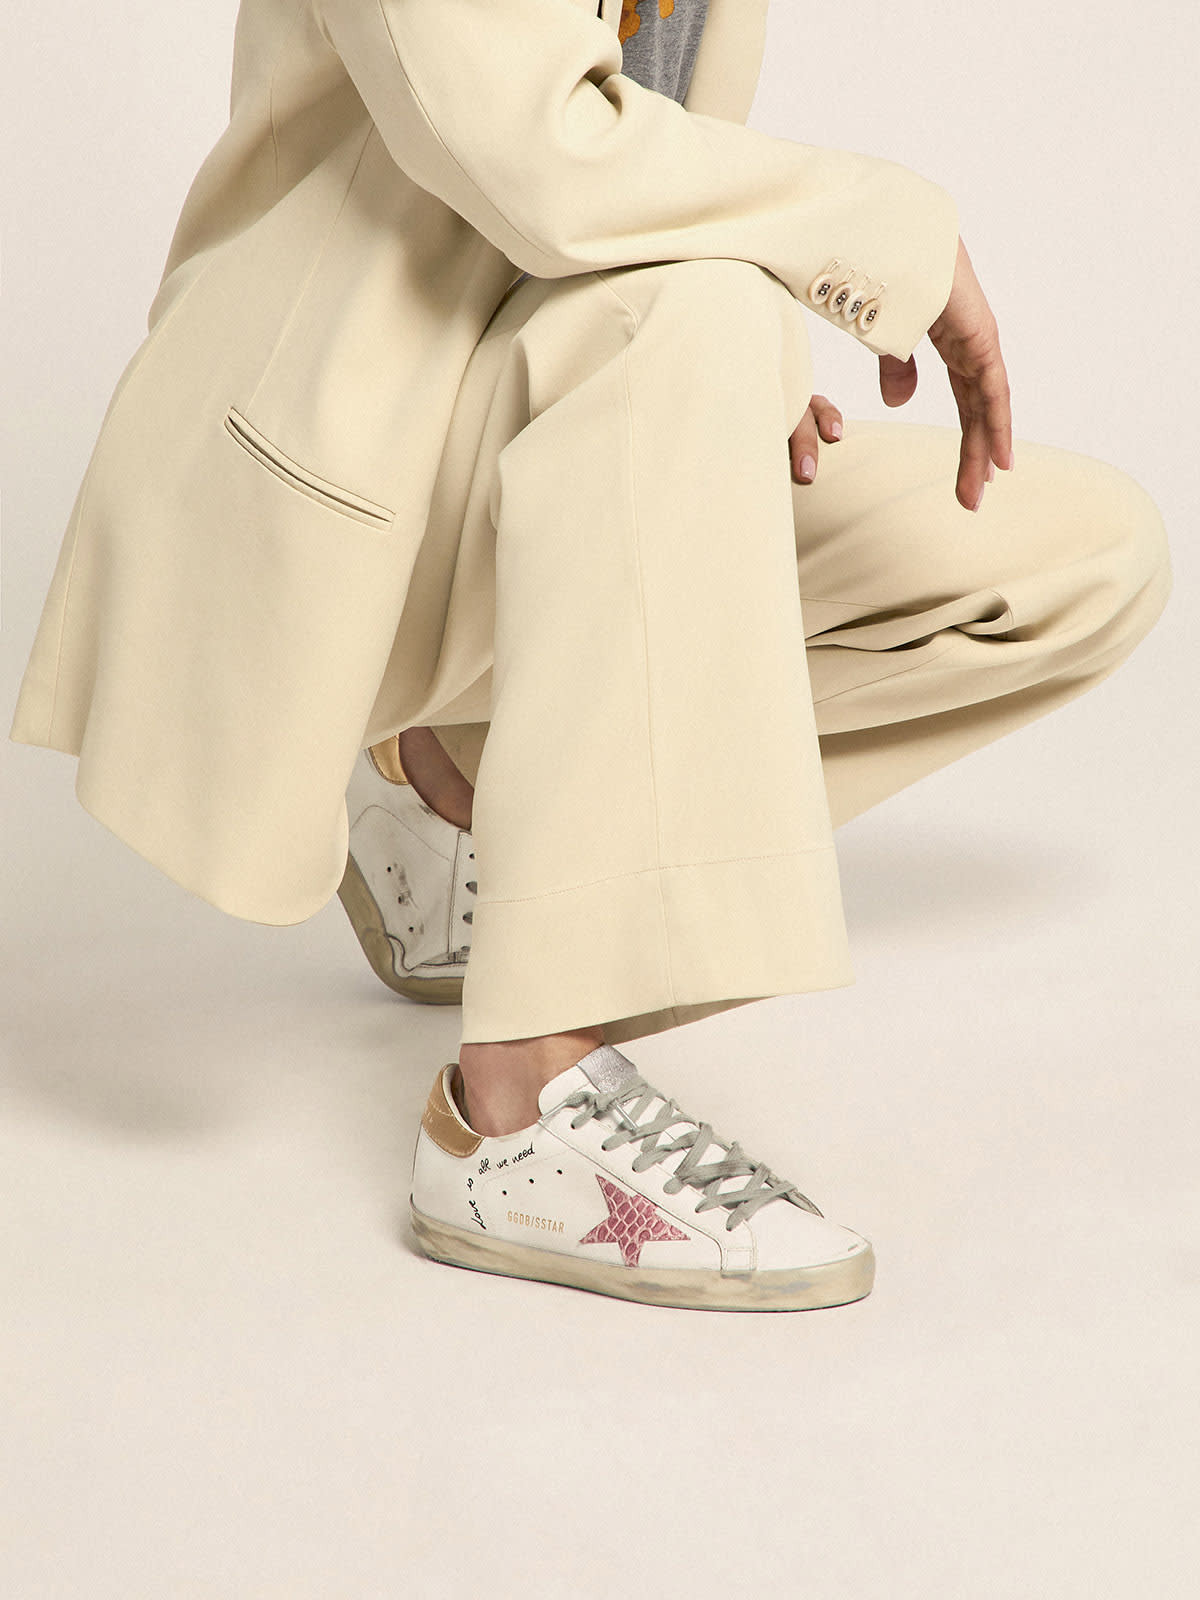 Super-Star sneakers with handwritten lettering and crocodile-print leather  stars | Golden Goose